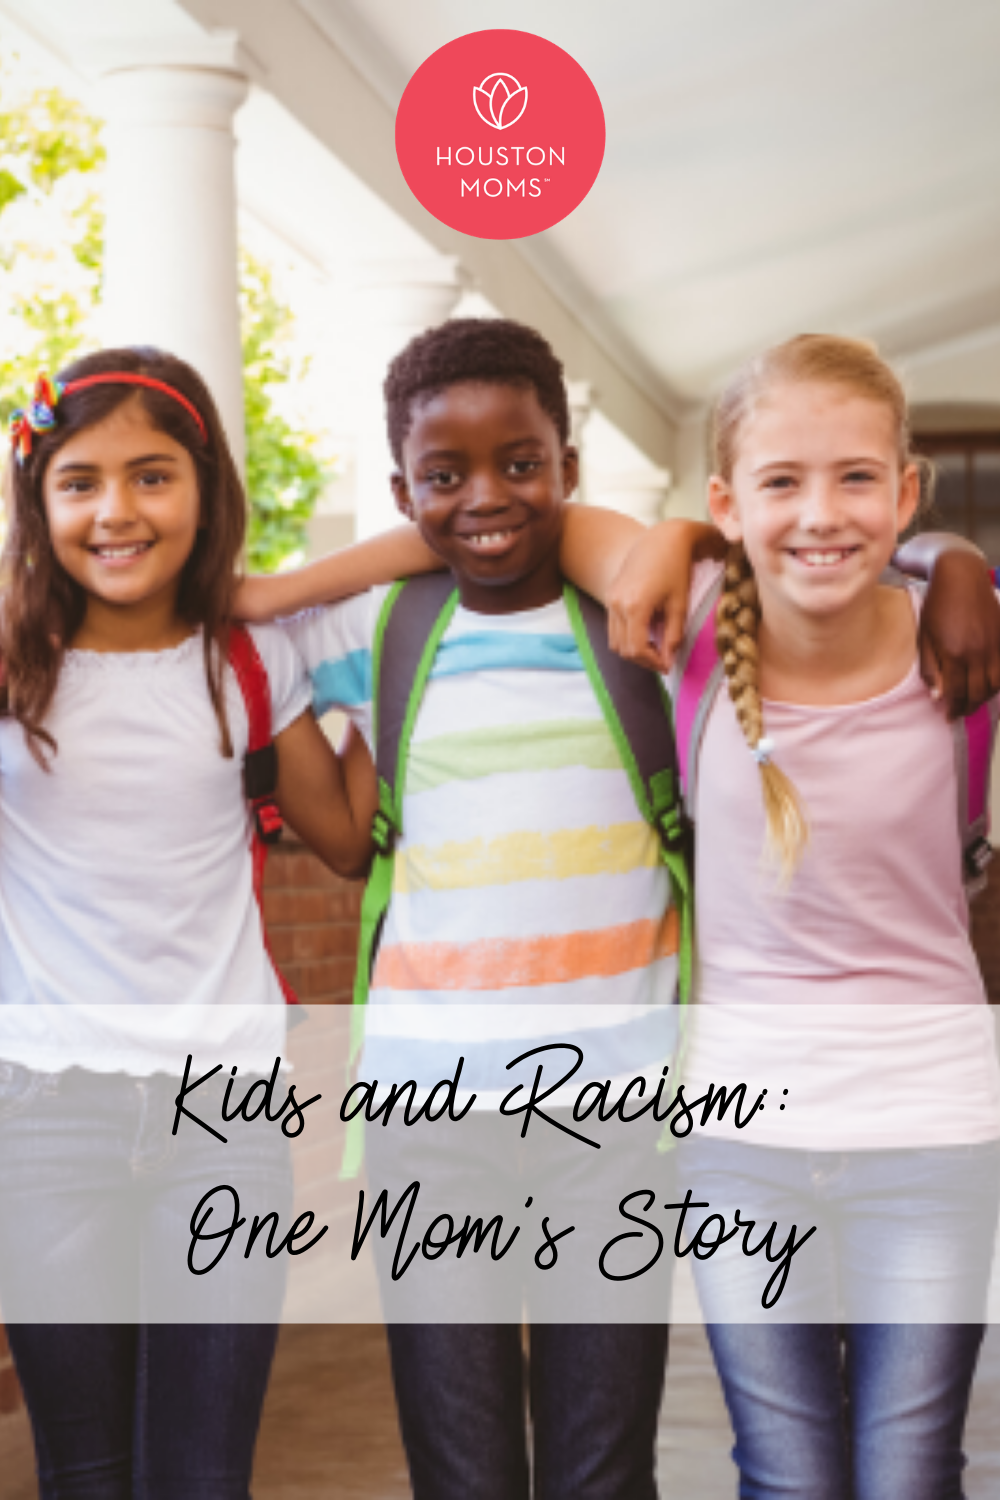 Houston Moms "Kids and Racism:: One Mom's Story" #houstonmoms #houstonmomsblog #momsaroundhouston